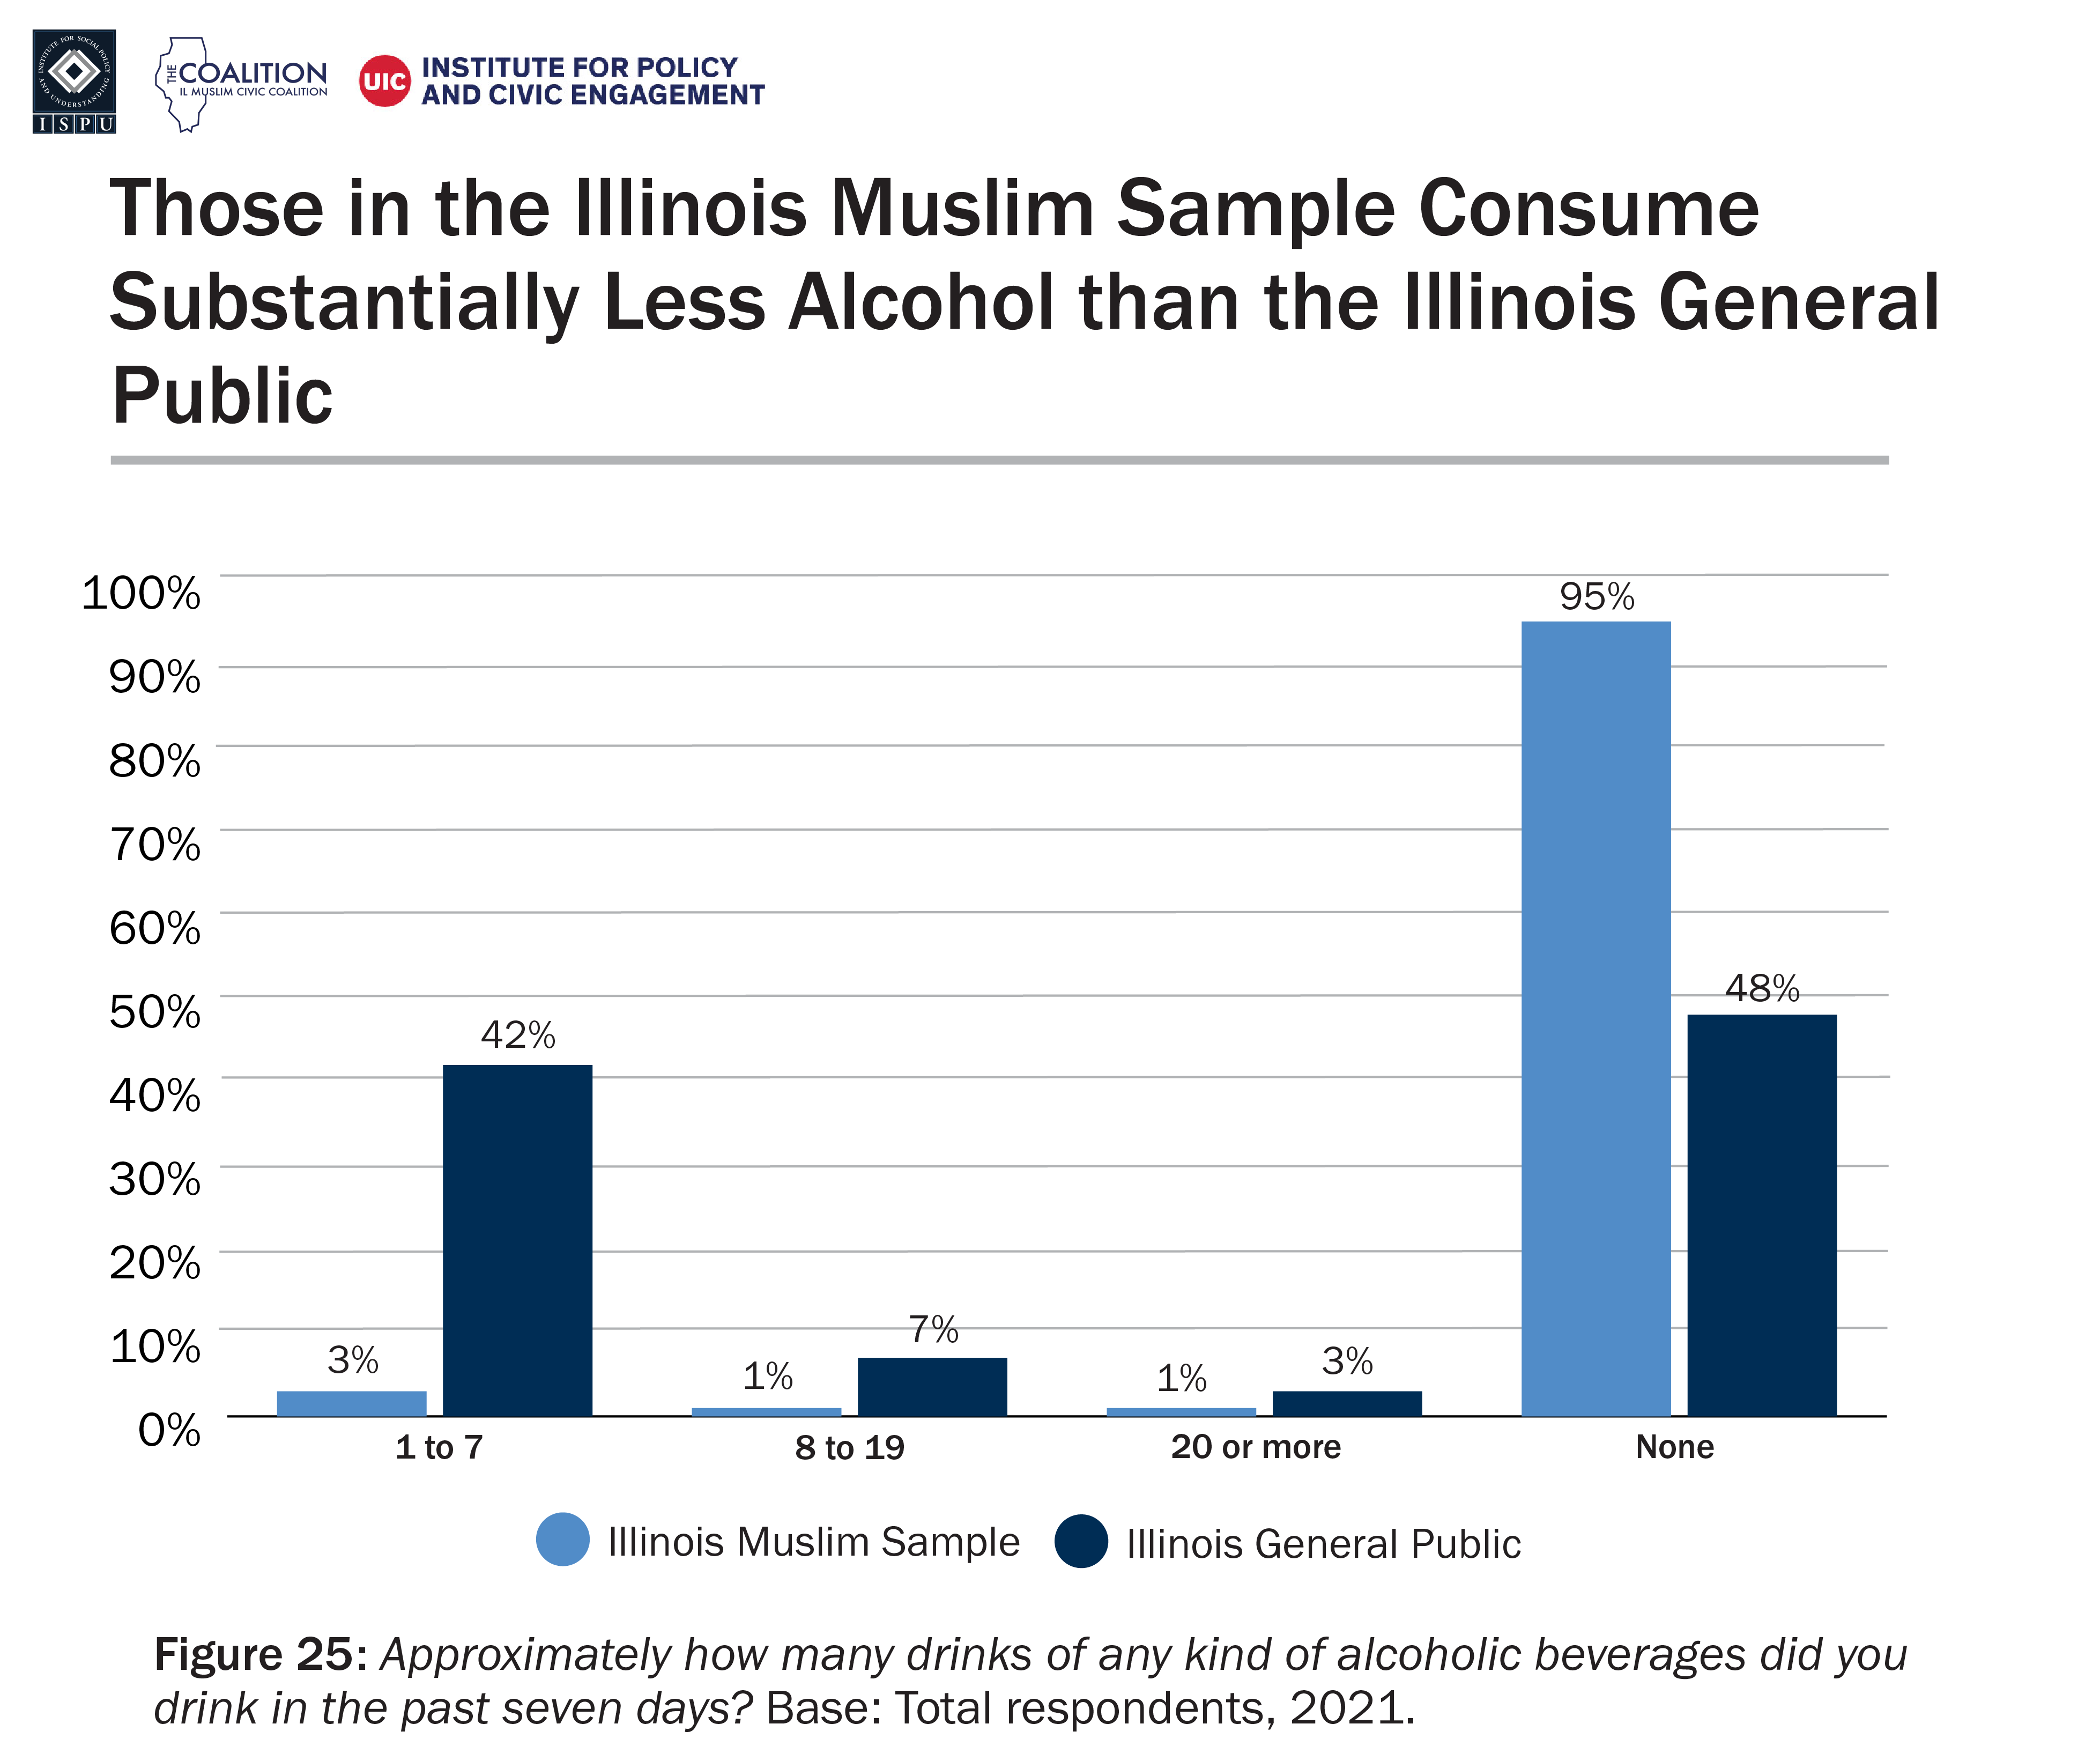 A bar graph showing alcohol consumption among the Illinois Muslim sample and Illinois general public